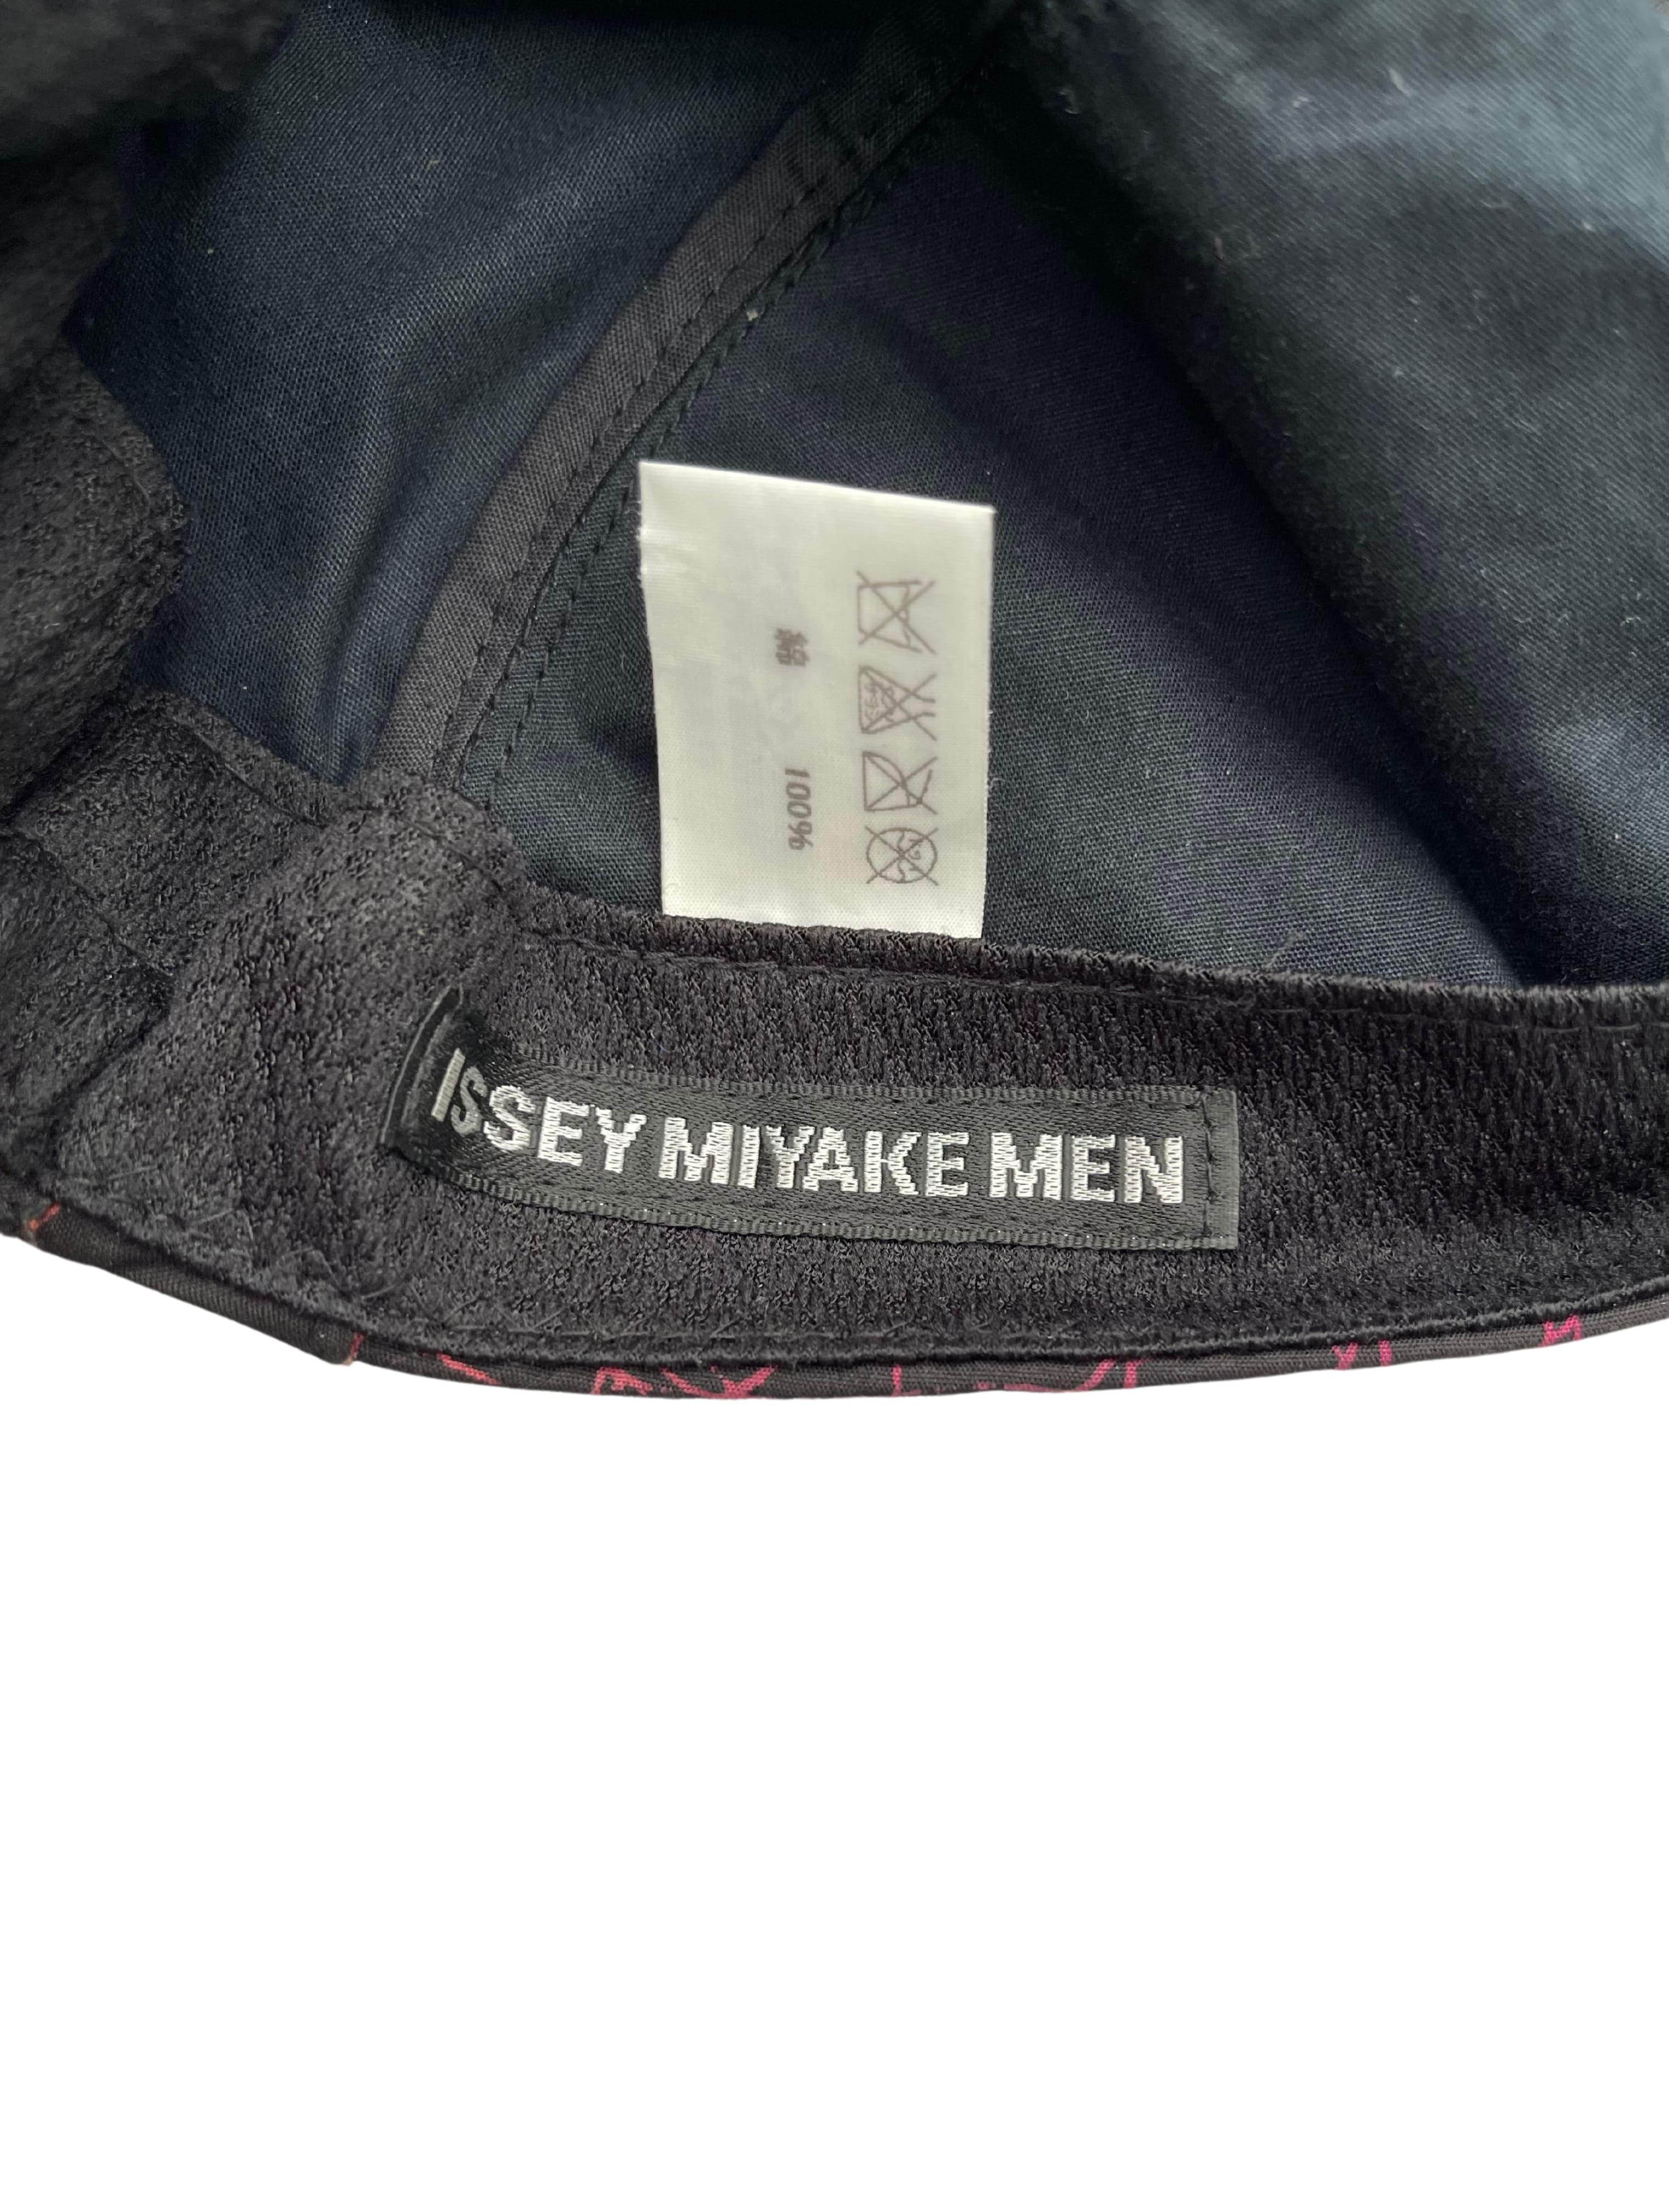 From Autumn Winter 2014 collection, Issey Miyake menswear.

Yusuke Takahashi took on the fundamental contest of human existence—man versus nature—with his A/W2014 collection for Issey Miyake Men.

Japan Exclusive.

Size: OS

Condition: 9/10, no